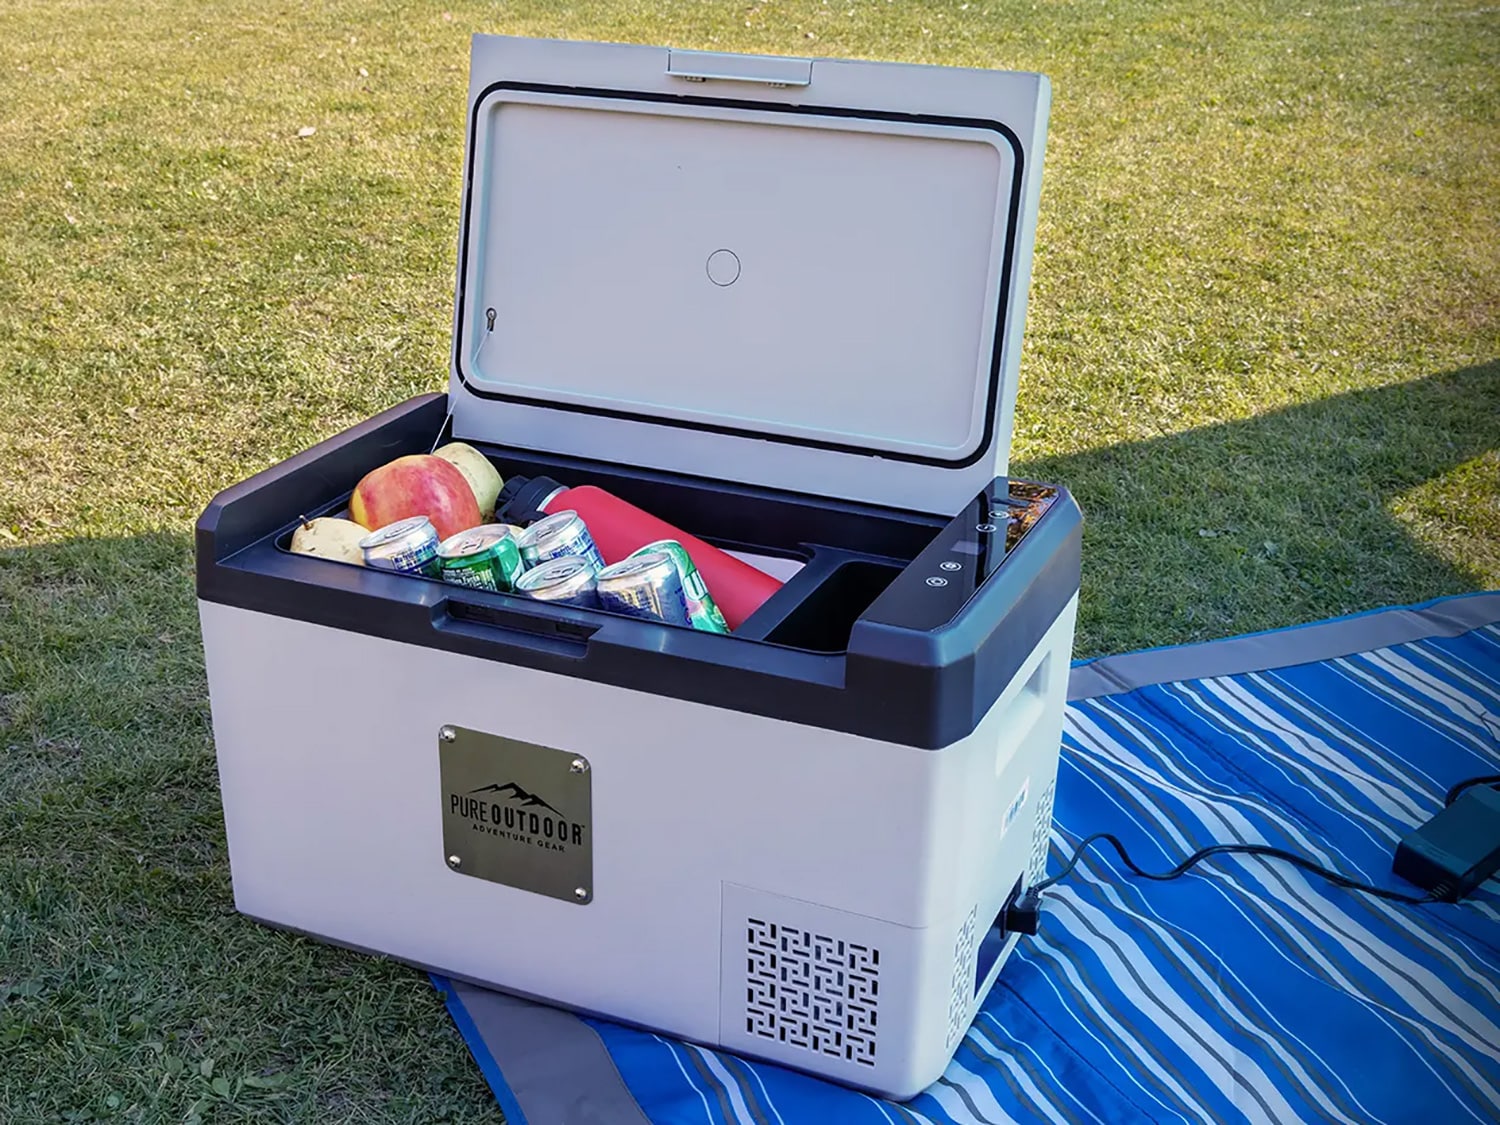 The Pure Outdoor Portable Refrigerator holding various drinks.